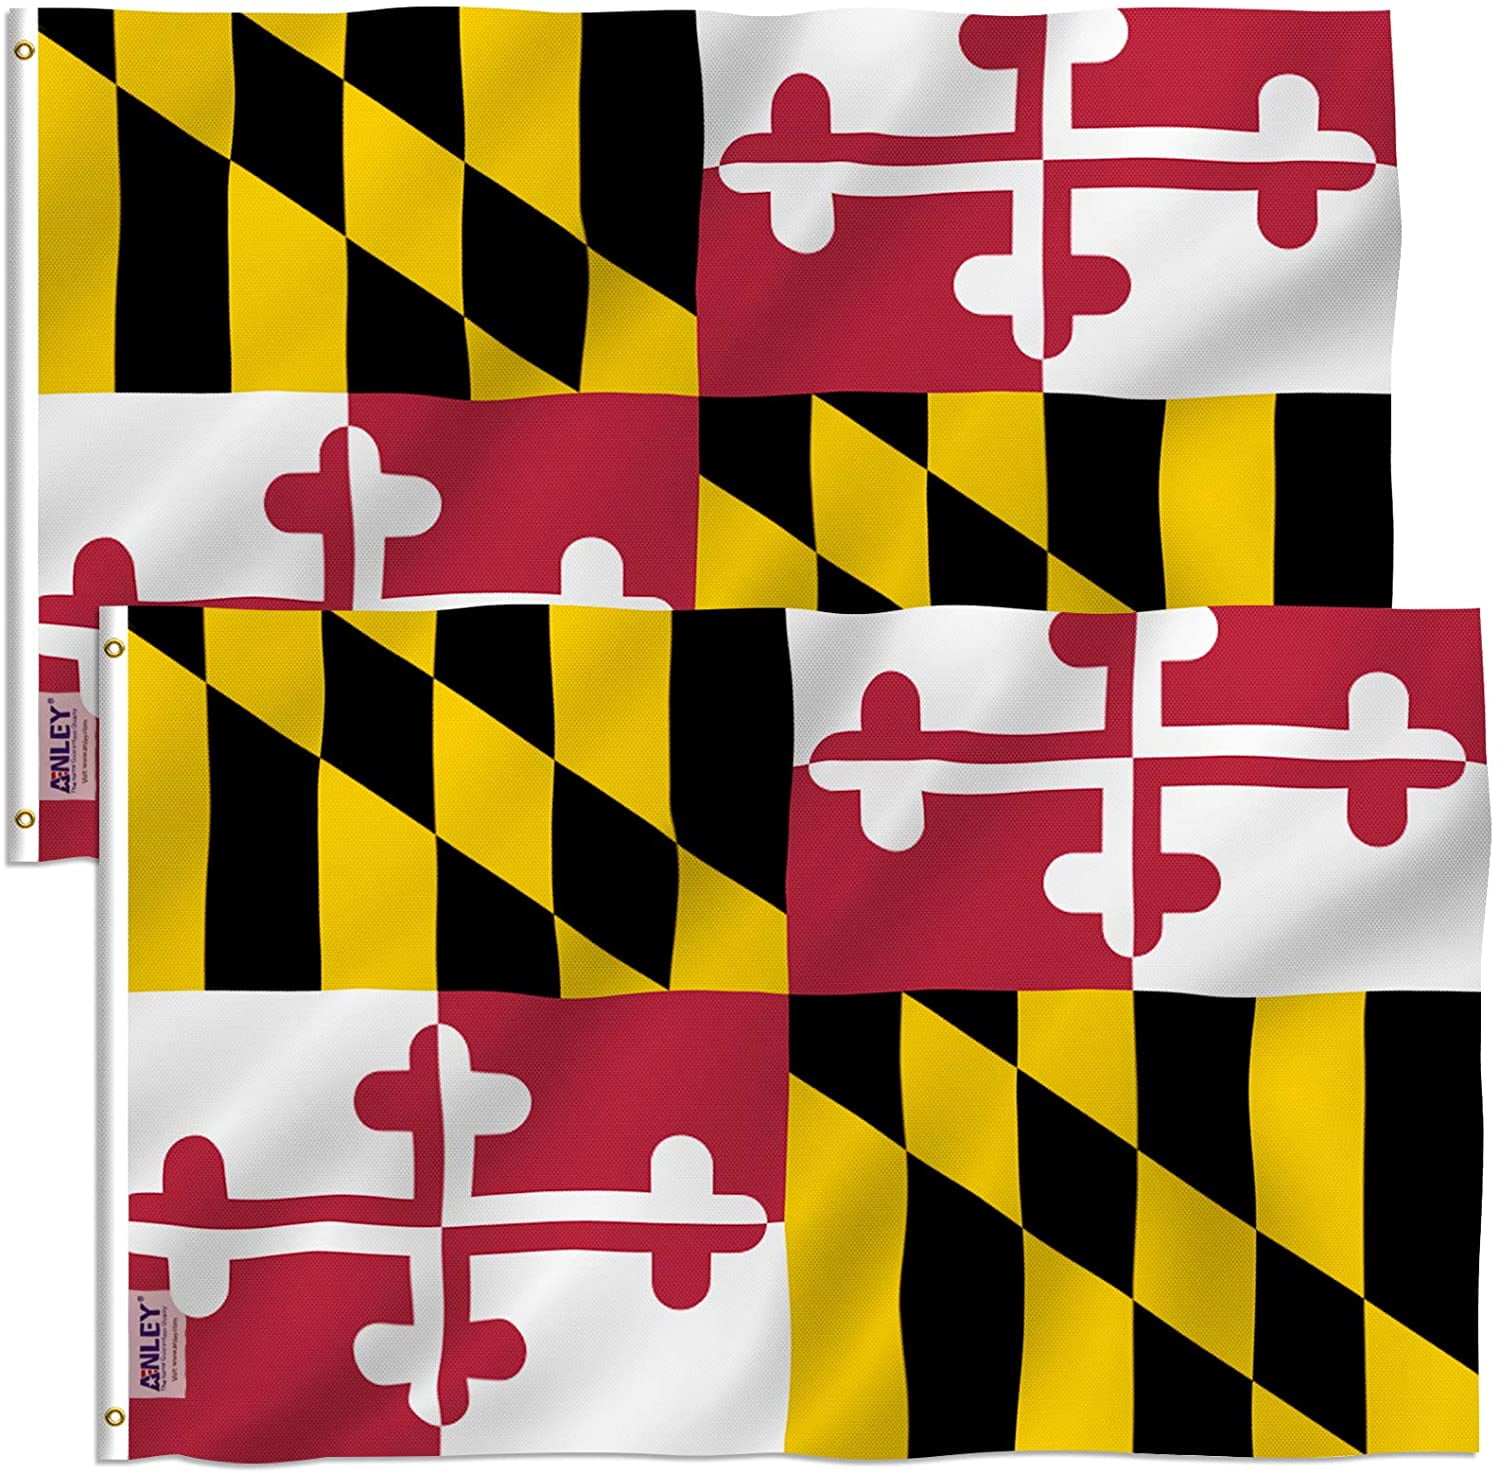 3X5 Maryland Flag State of Maryland Premium Banner Grommets TWO FLAGS Fast Ship!